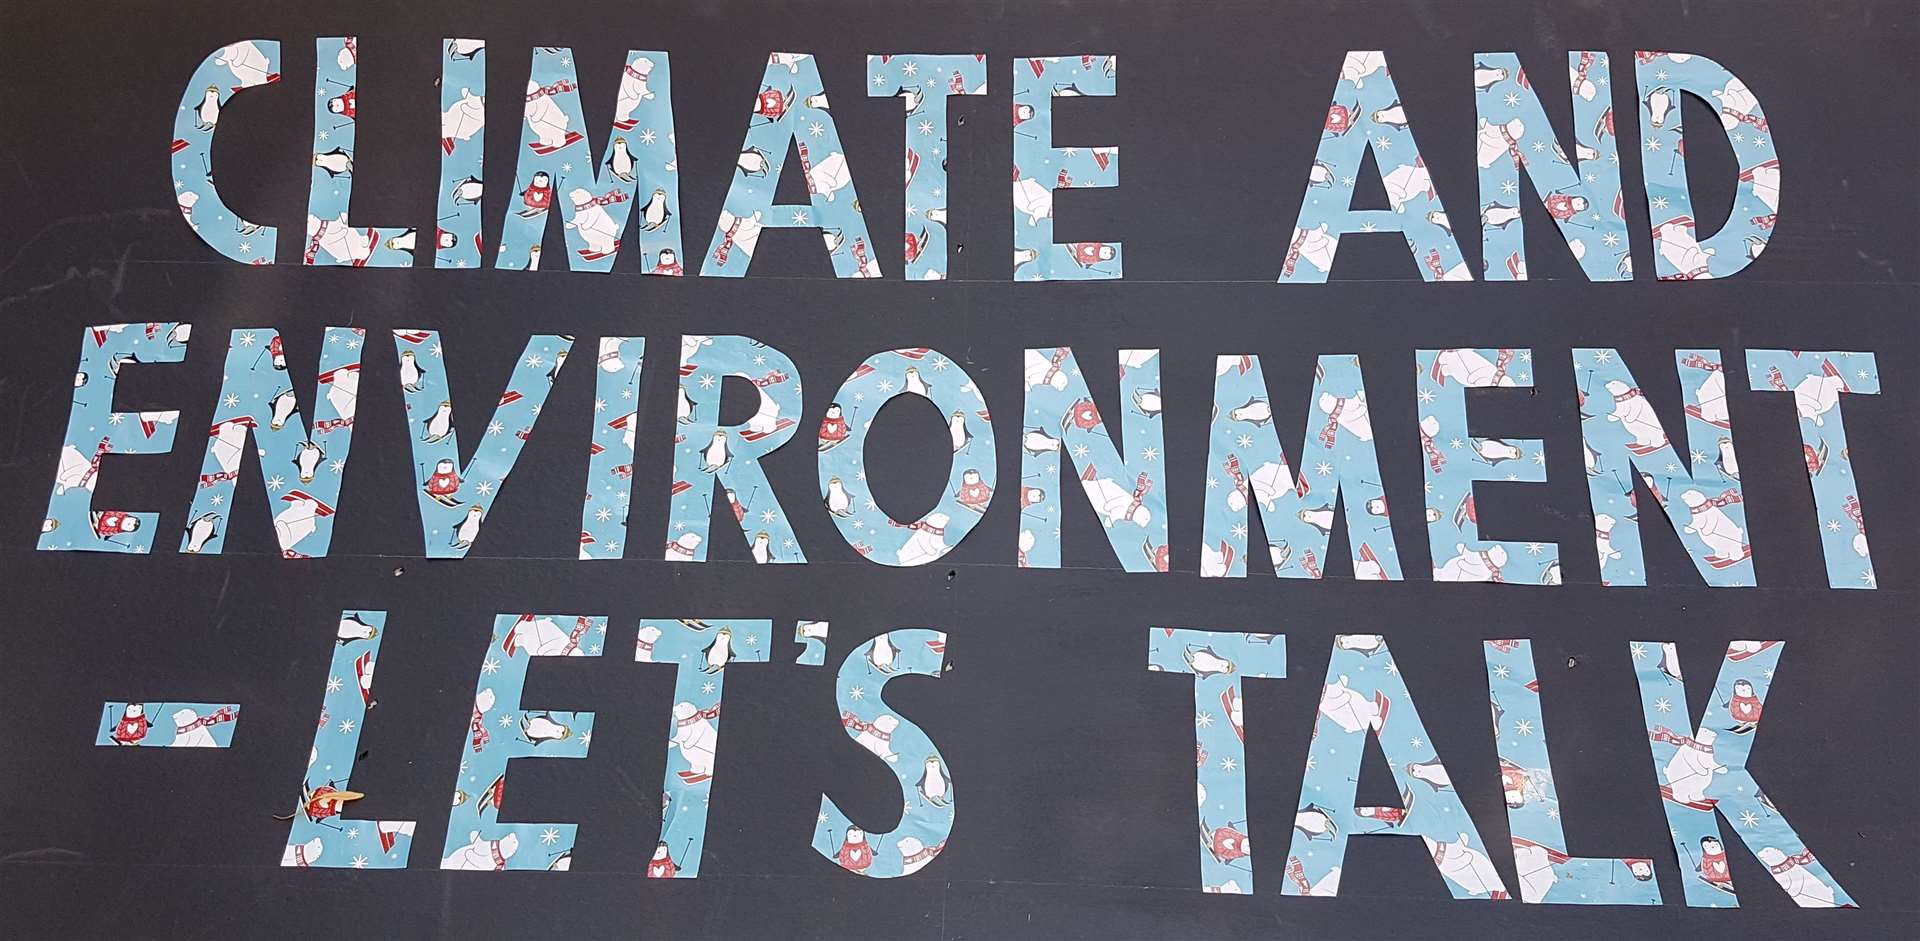 Extinction Rebellion Forres are inviting face-to-face discussion about climate change.